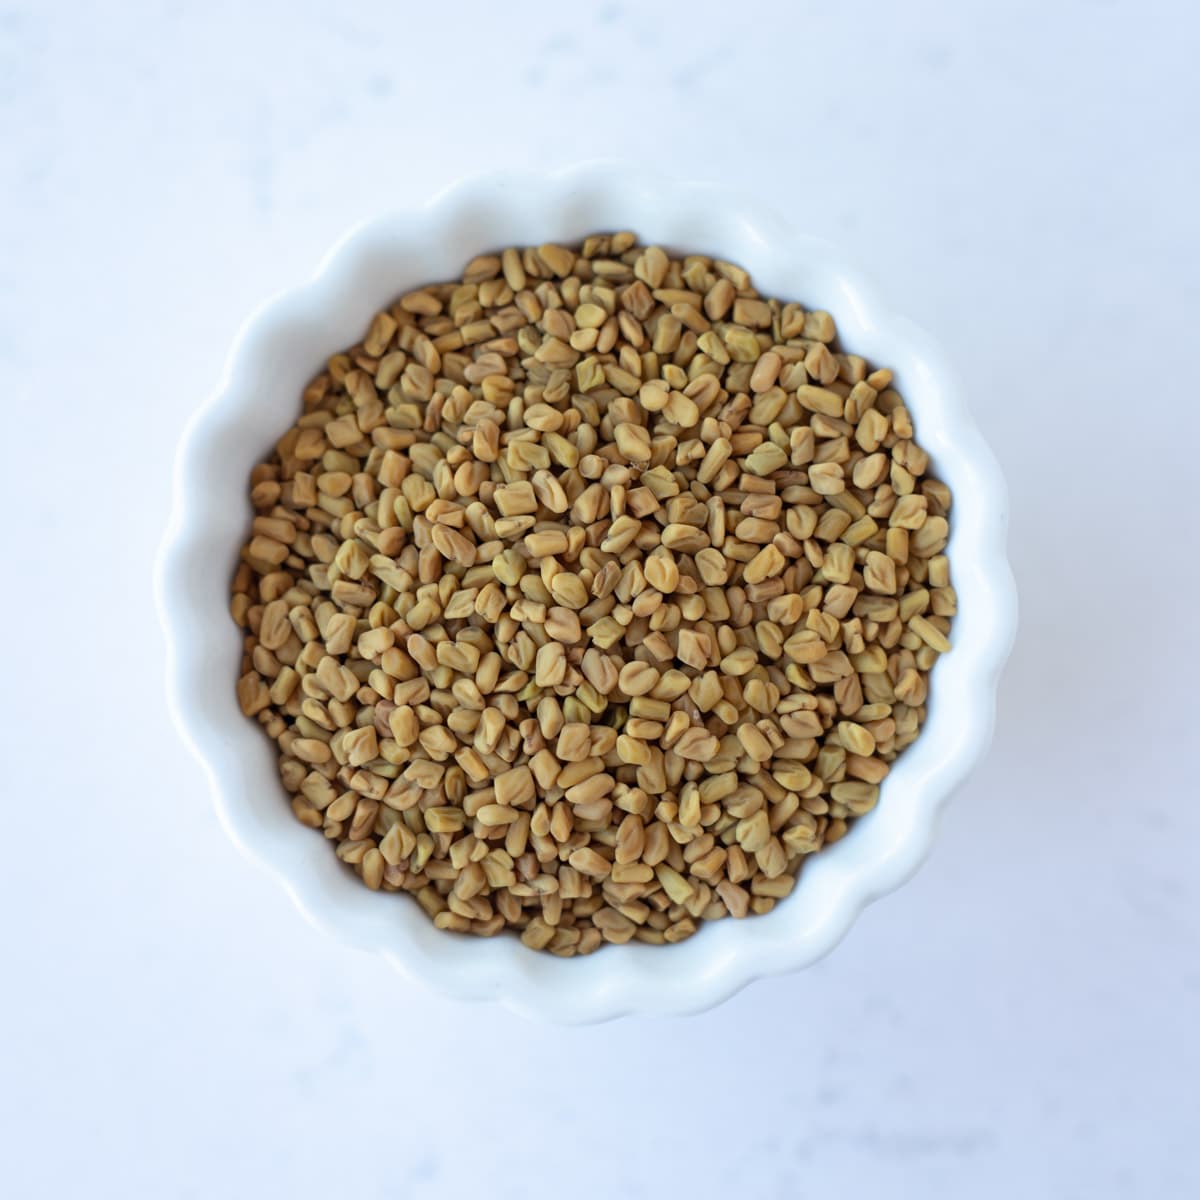 Fenugreek seeds in a small white bowl.